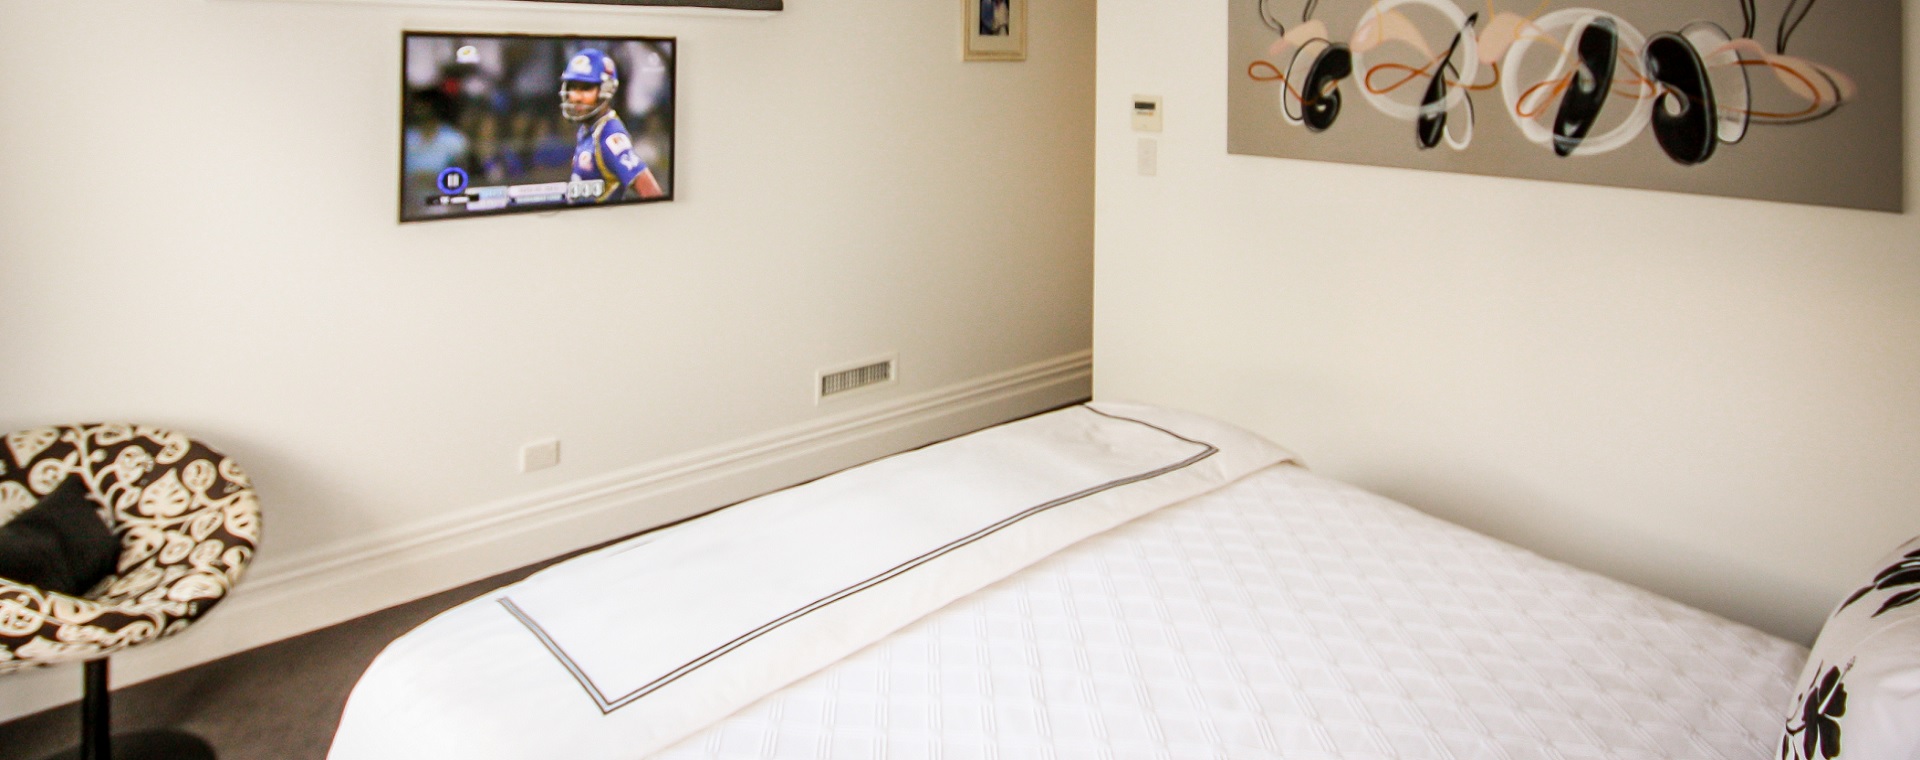 Bedroom with thin bezel TV screen playing an american football game